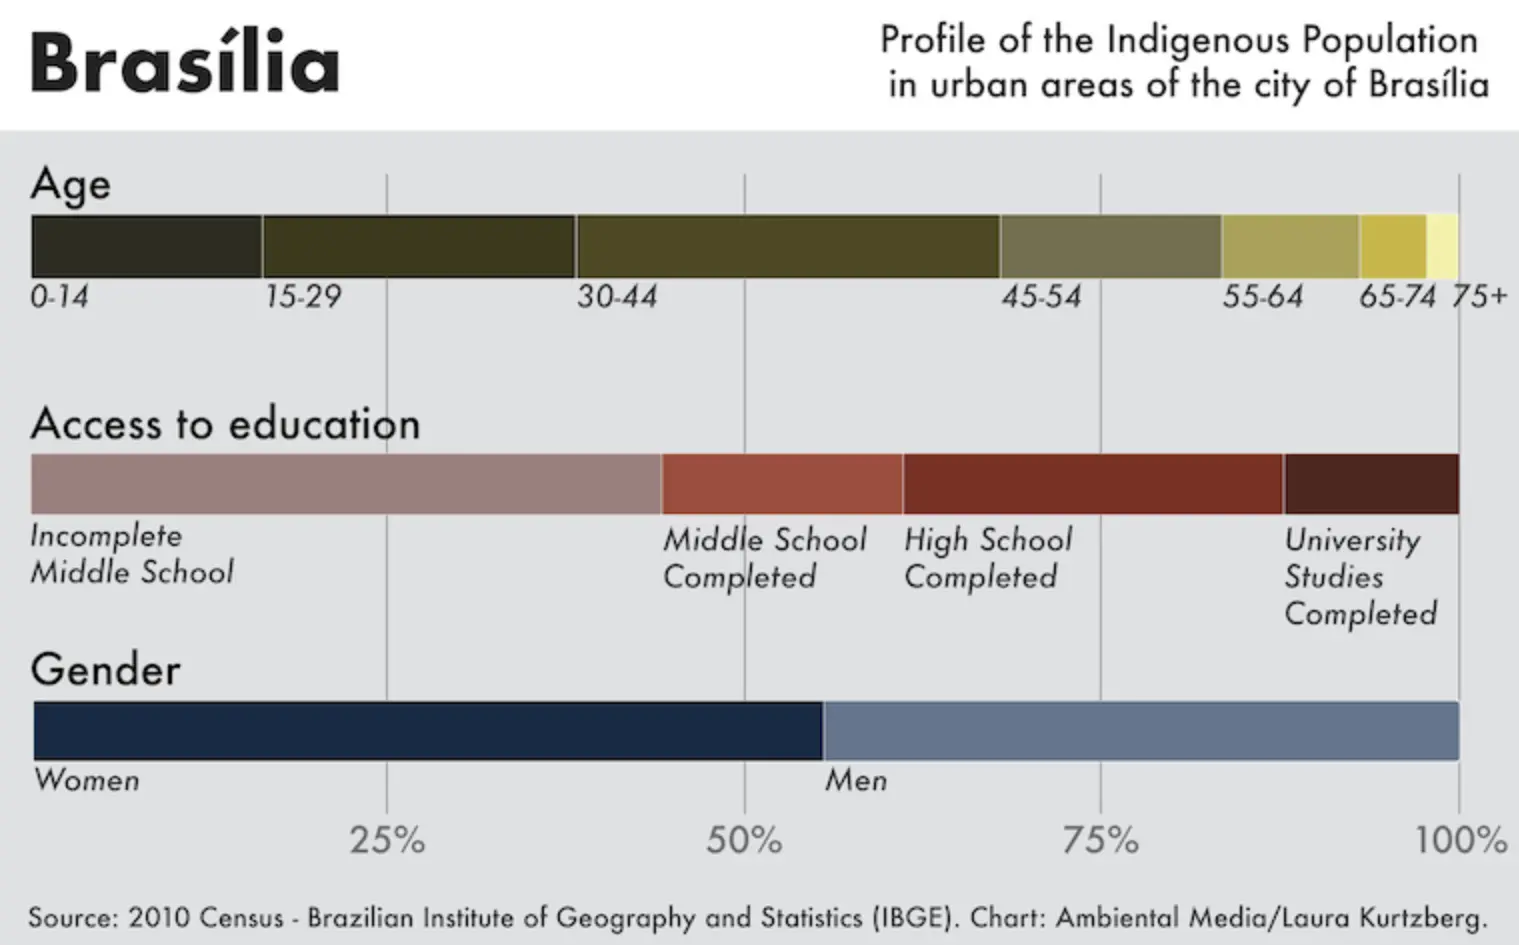 A graph showing the demographics of Brasília's Indigenous population, including age, access to education, and gender.